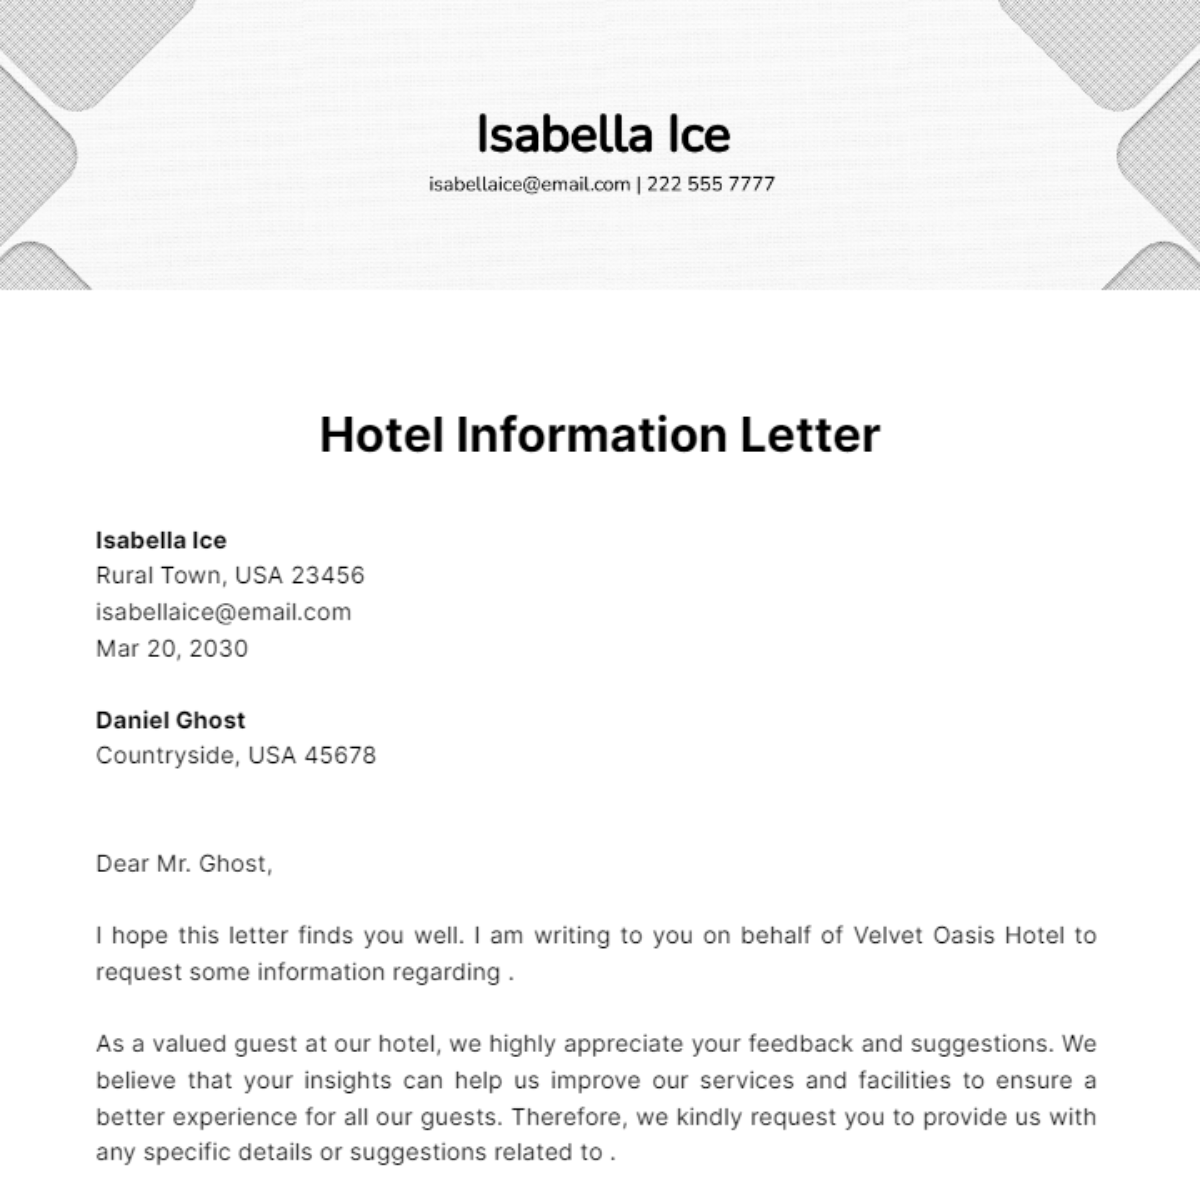 Hotel Information Letter Template